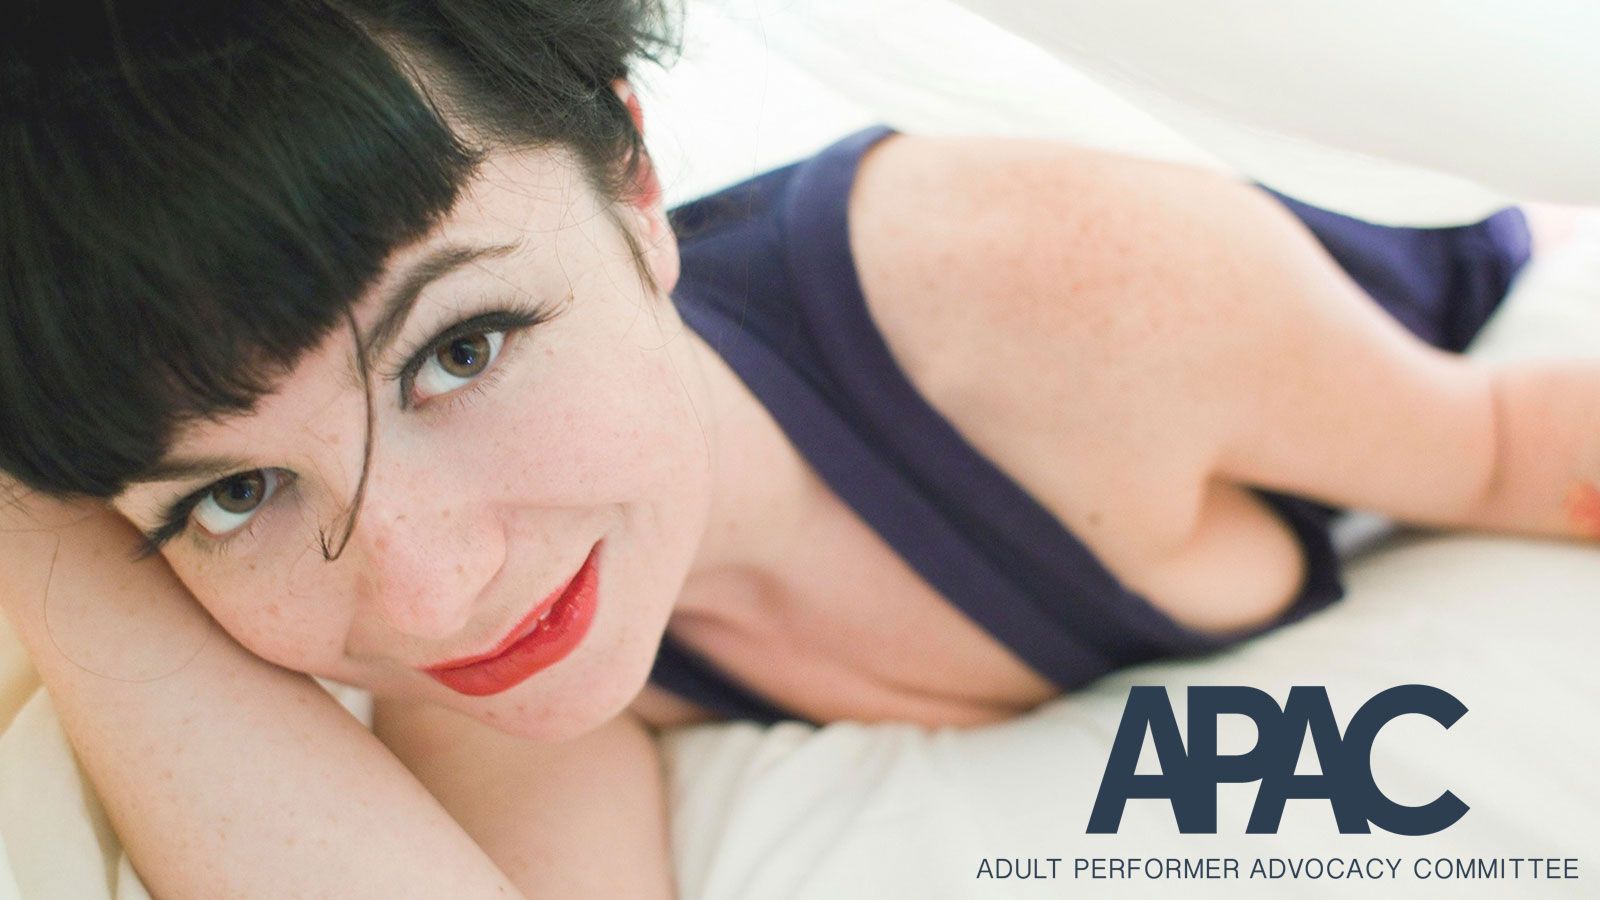 Siouxsie Q Has Been Elected As The New APAC Secretary